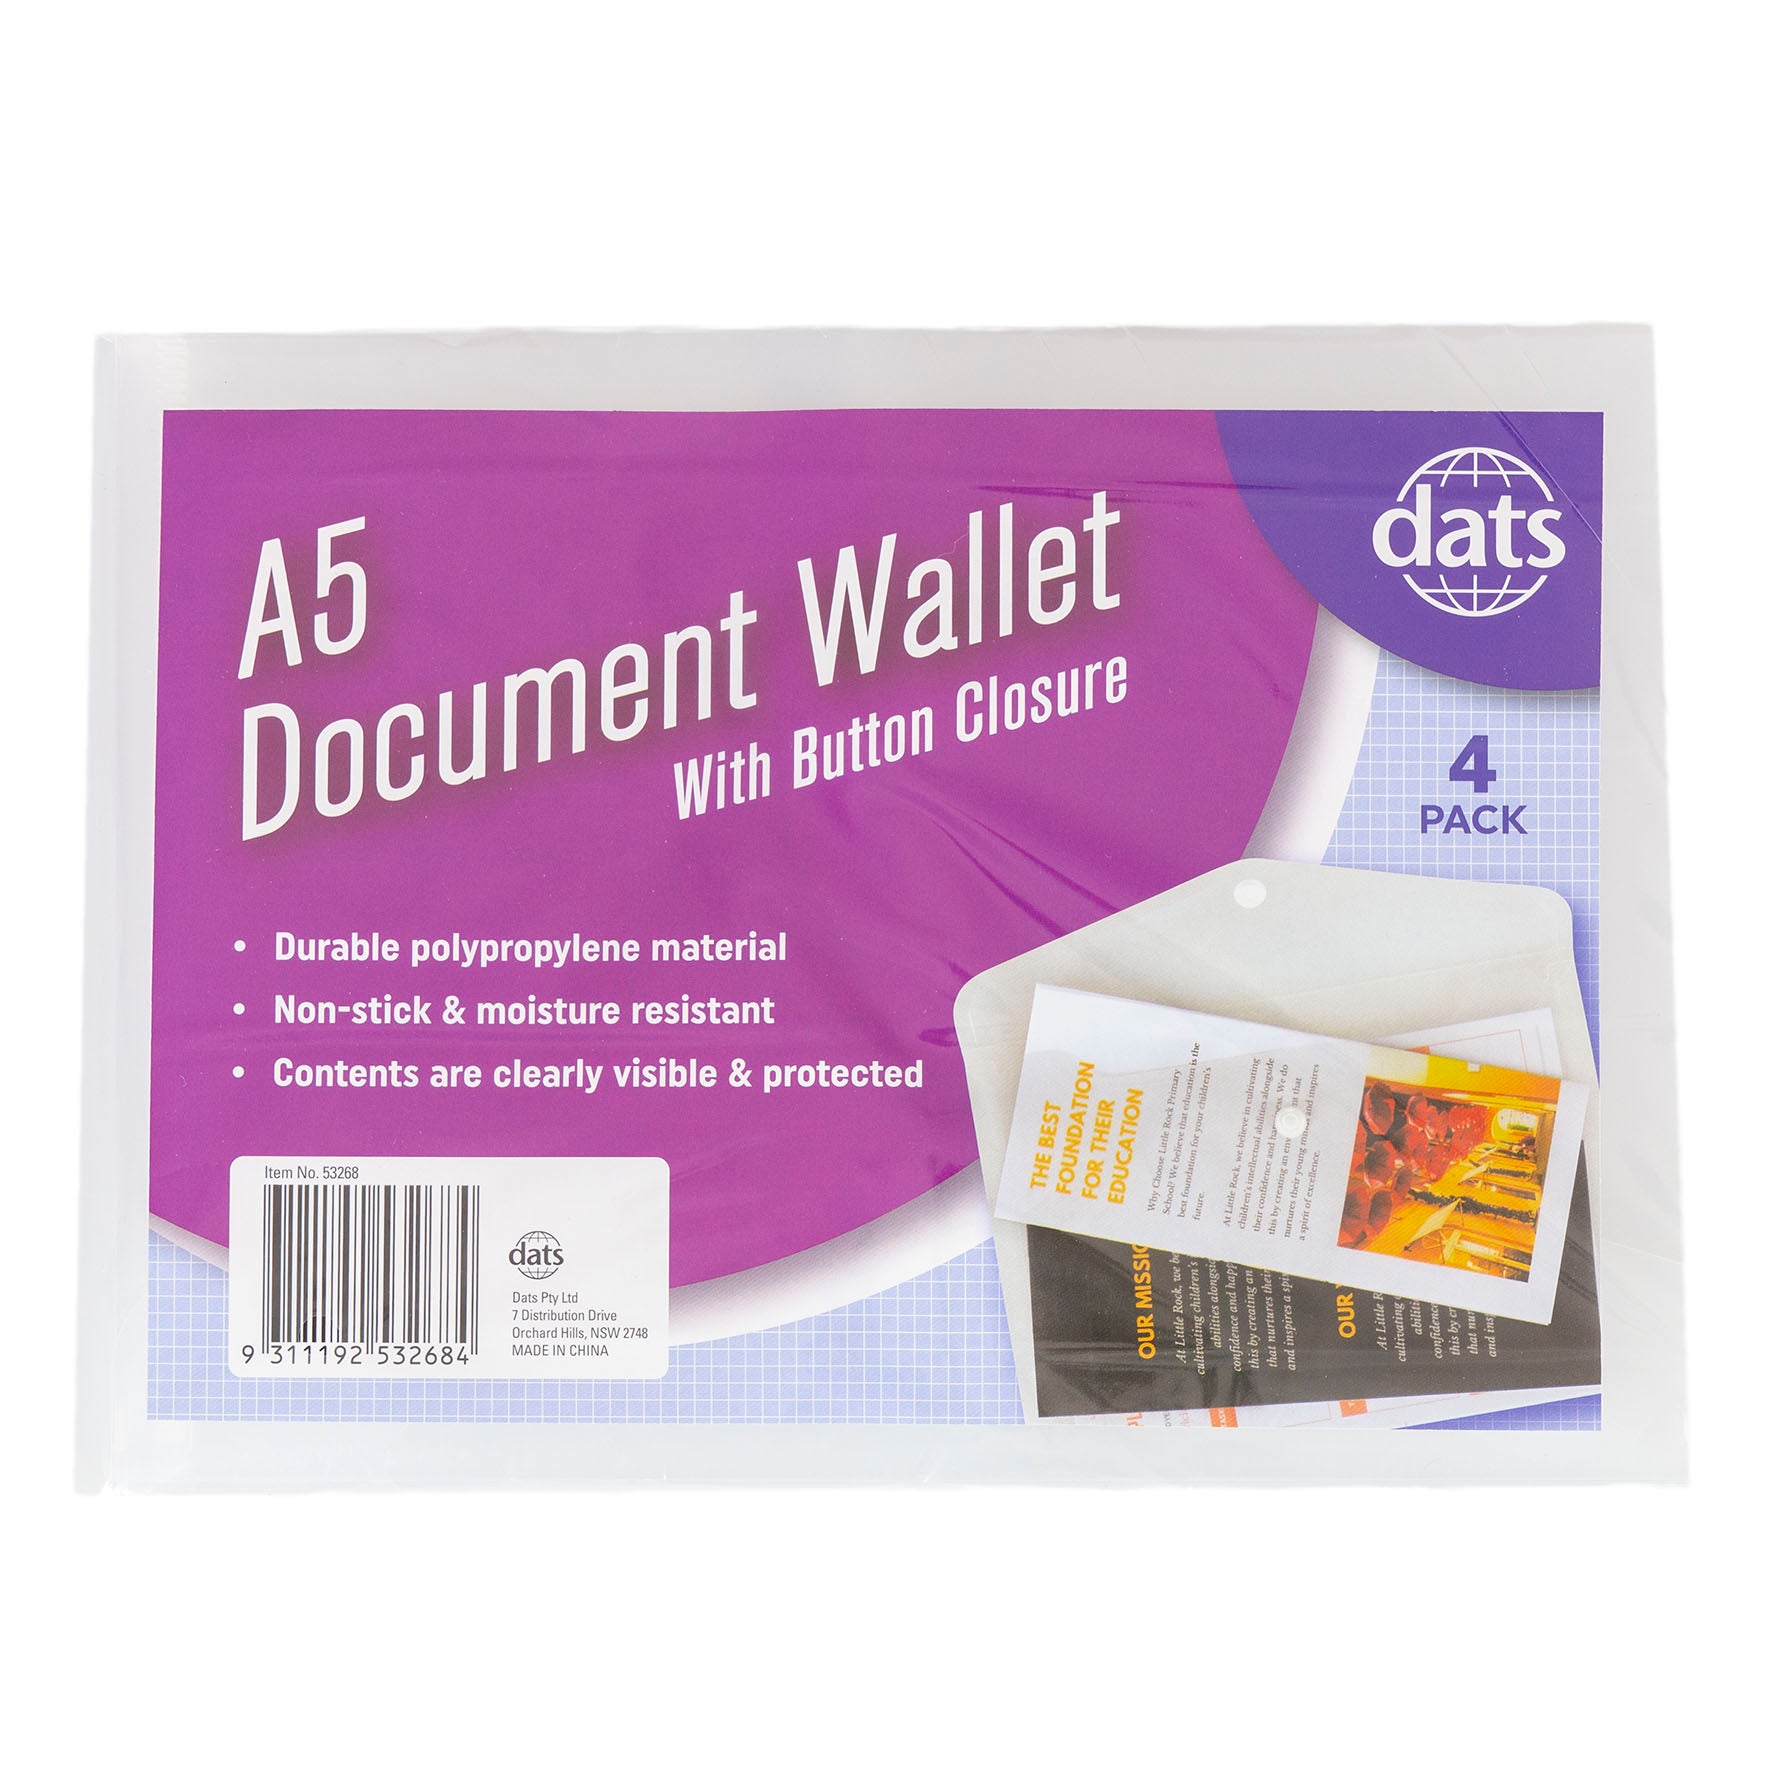 A5 Document Wallet with Button Closure - 4 Pack 1 Piece - Dollars and Sense